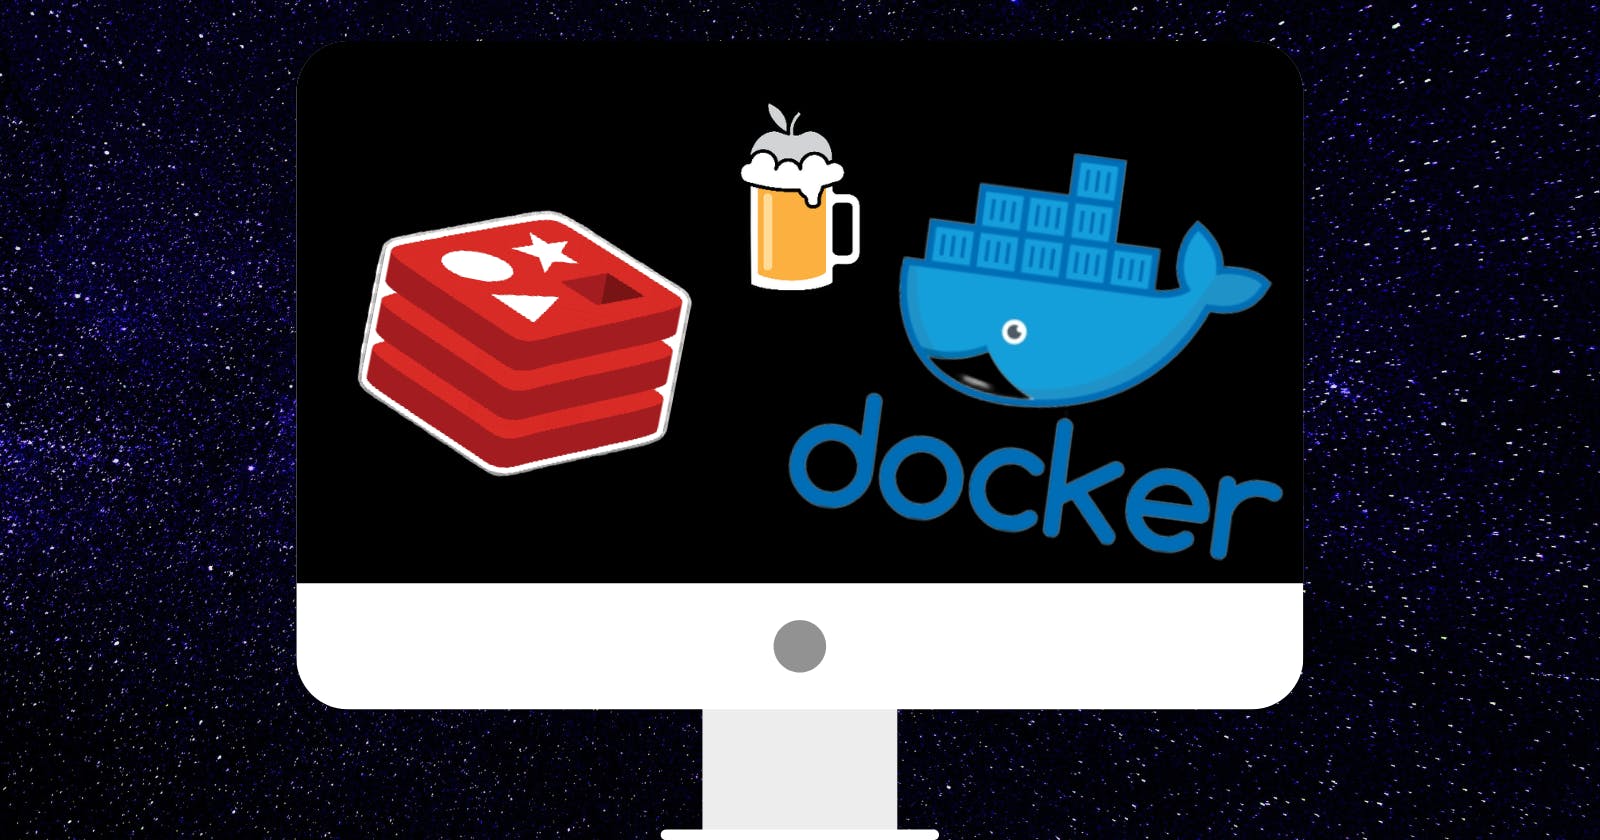 Dockerize redis on Mac with bash scripts for quick access